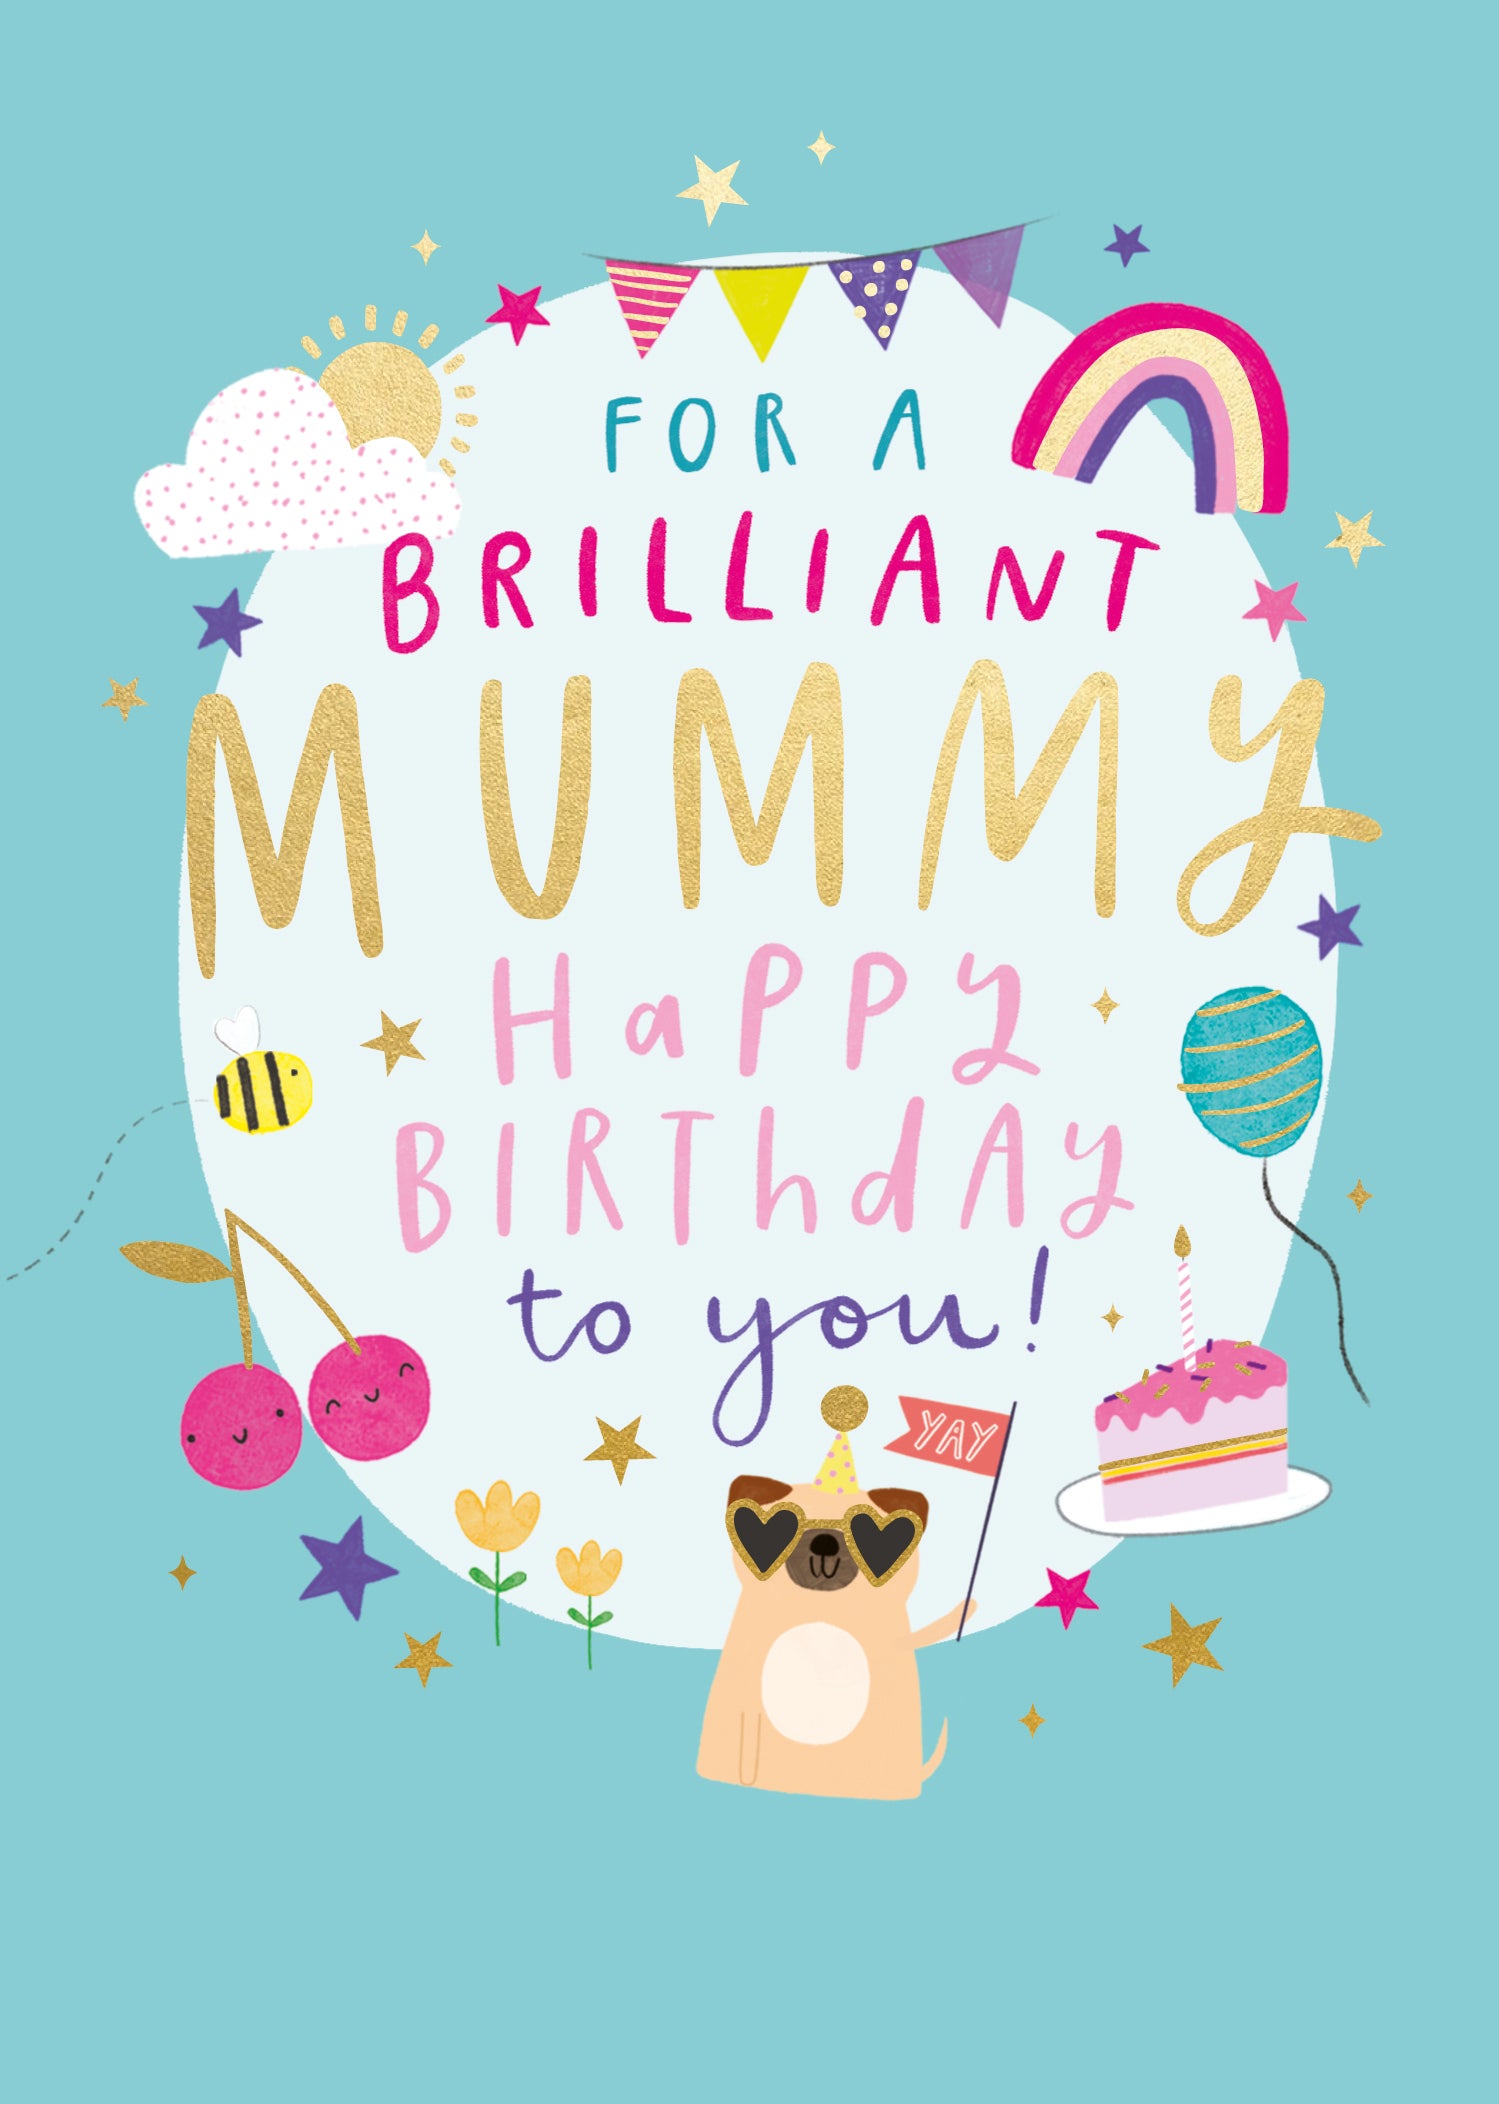 Iconic Mummy Birthday Card from Penny Black